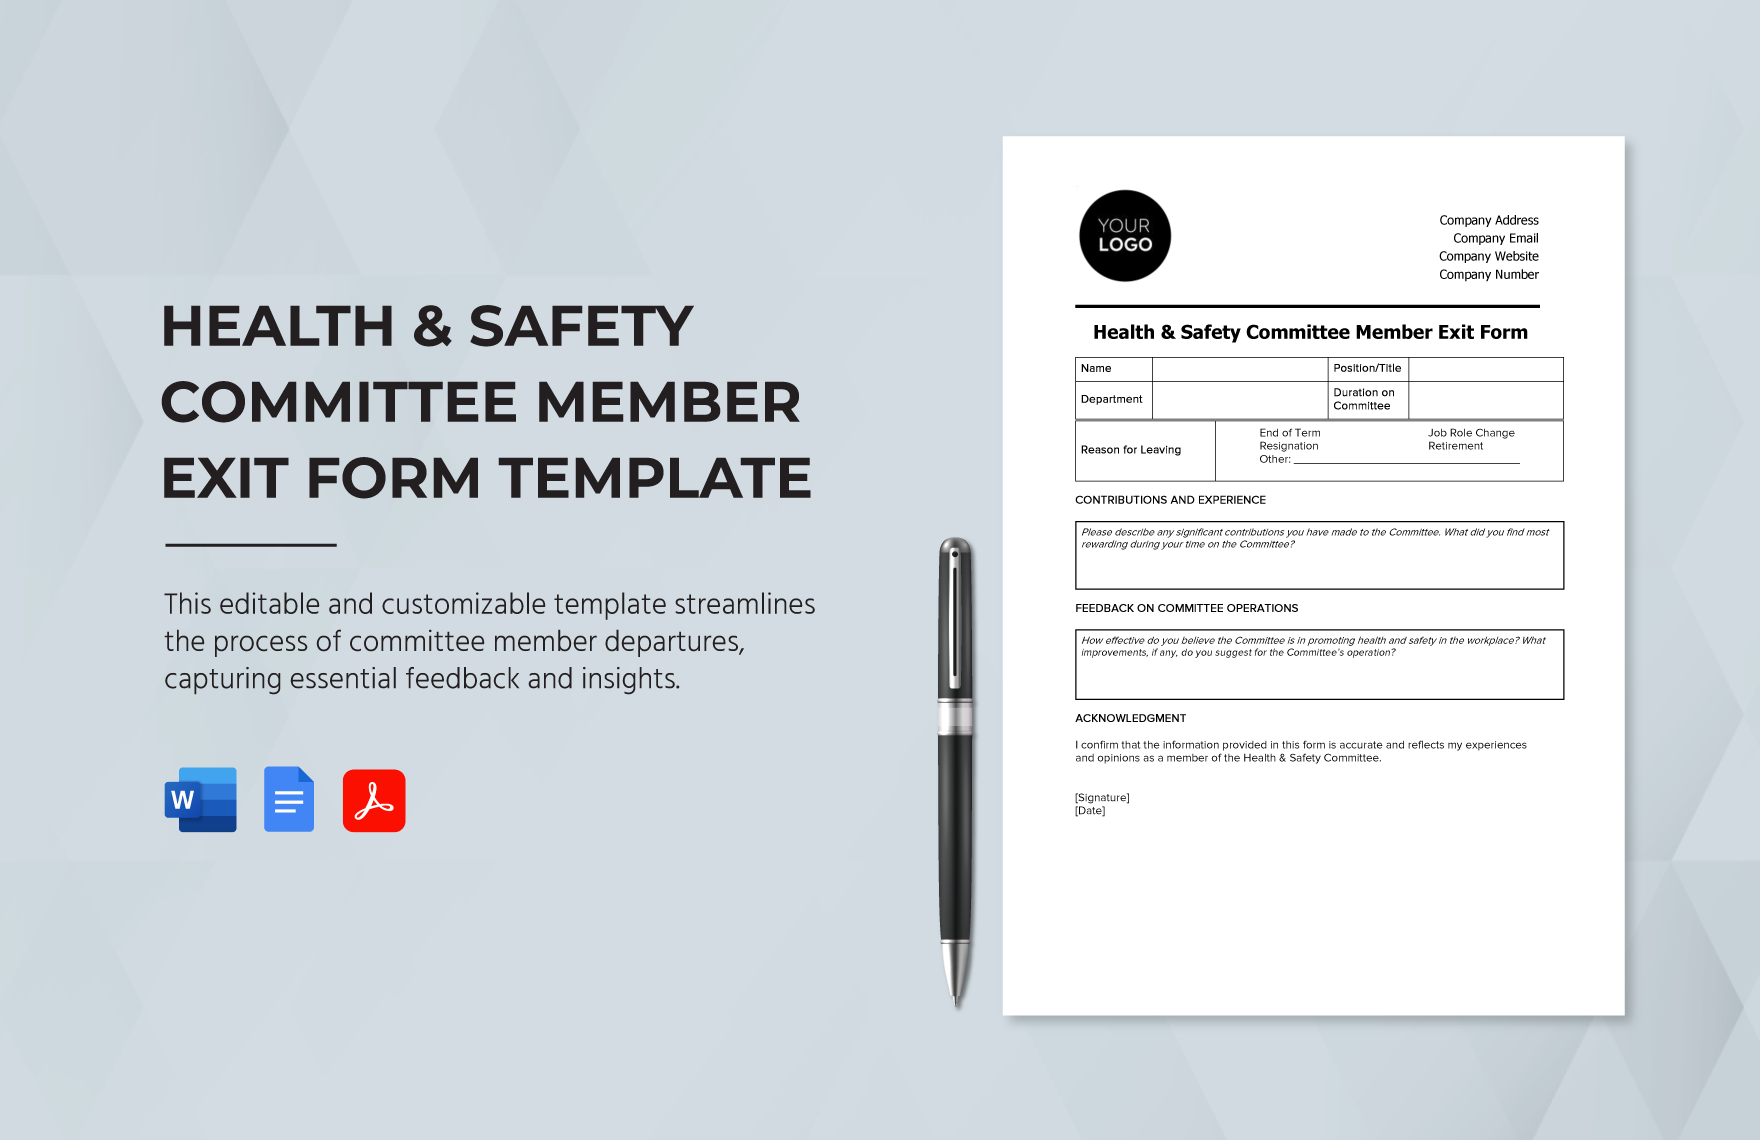 Health & Safety Committee Member Exit Form Template